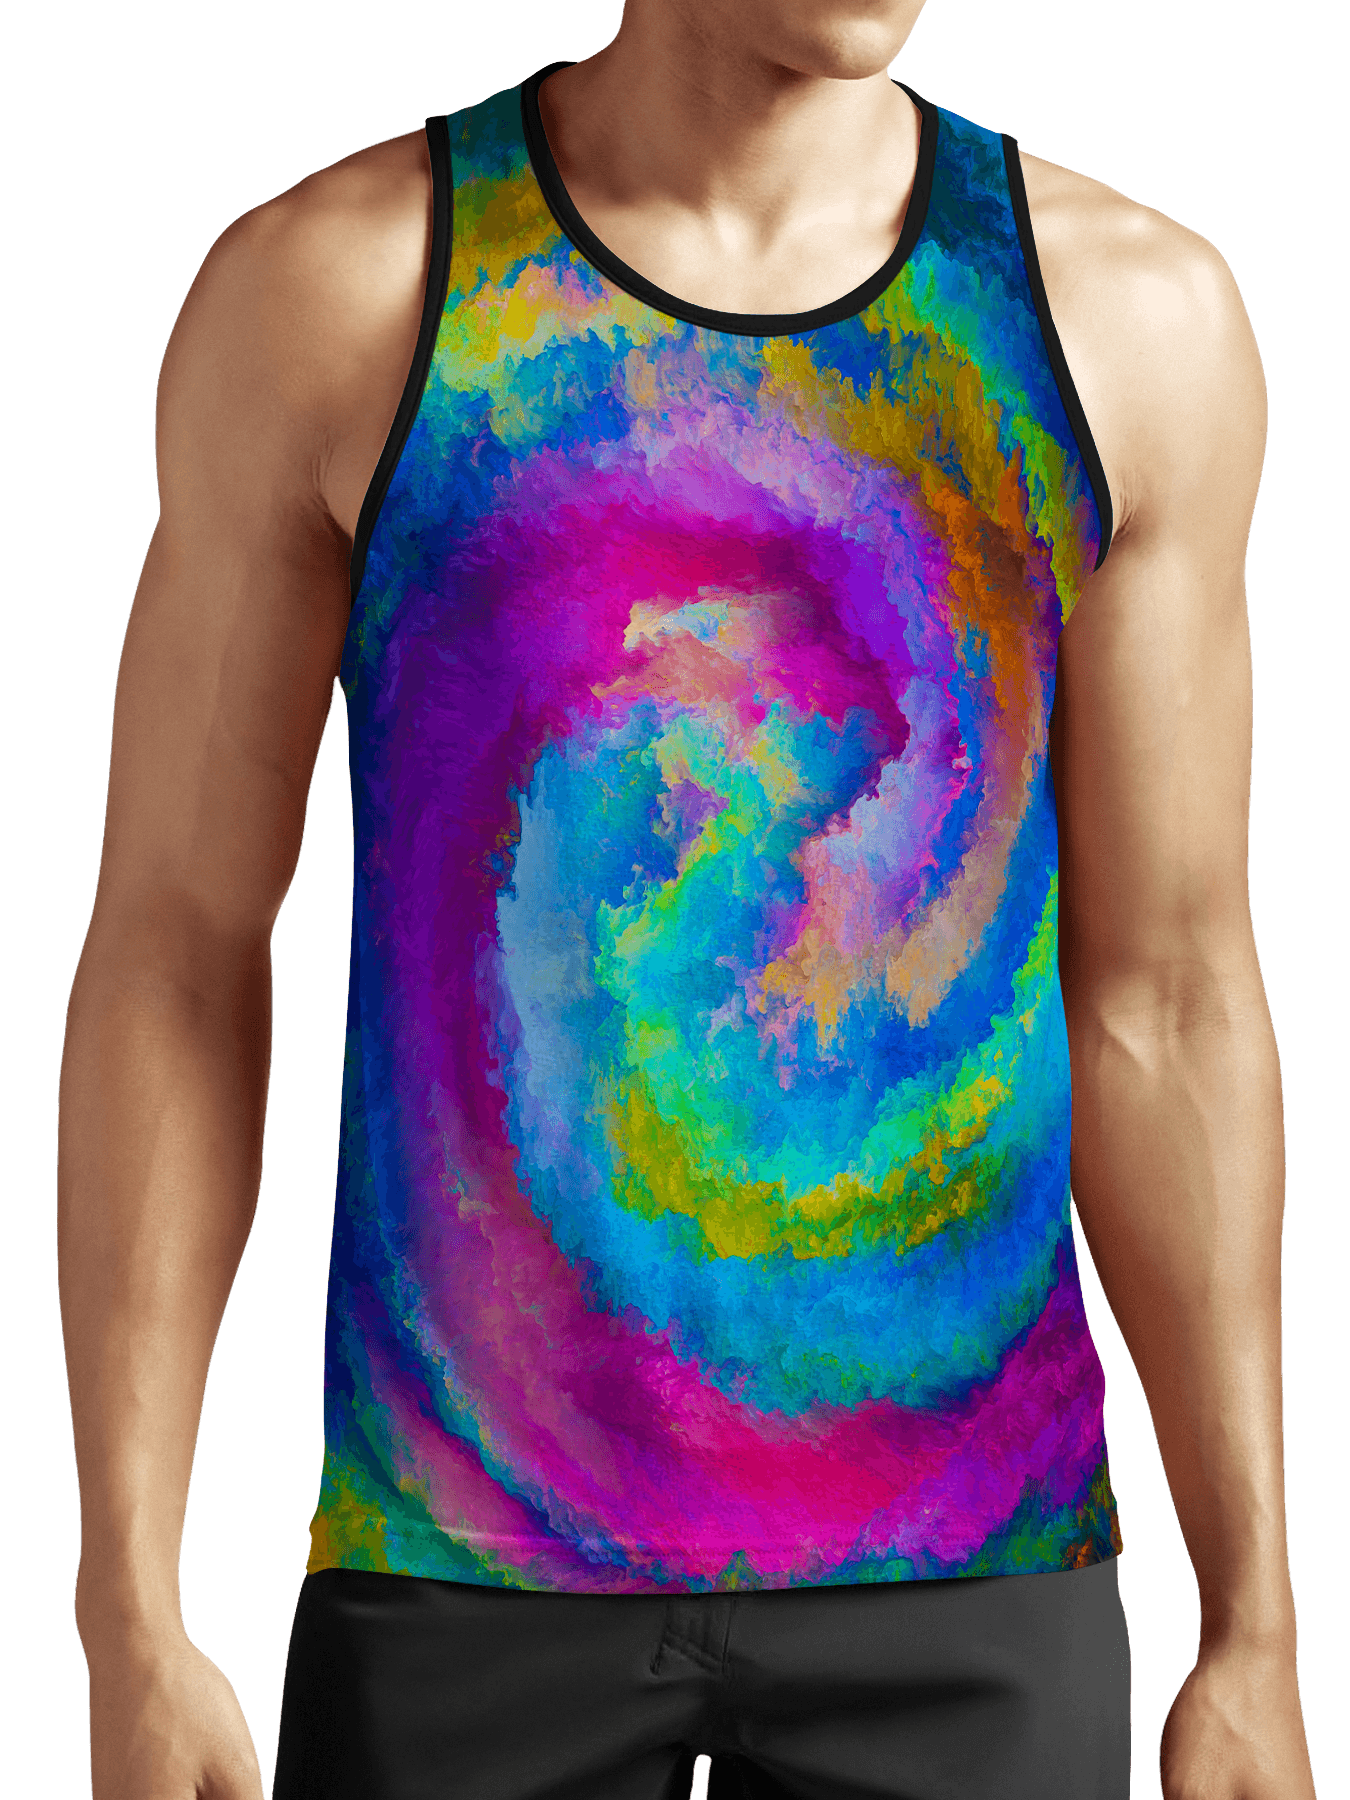 Virtualization of Colors Unisex Tank Top - Electro Threads